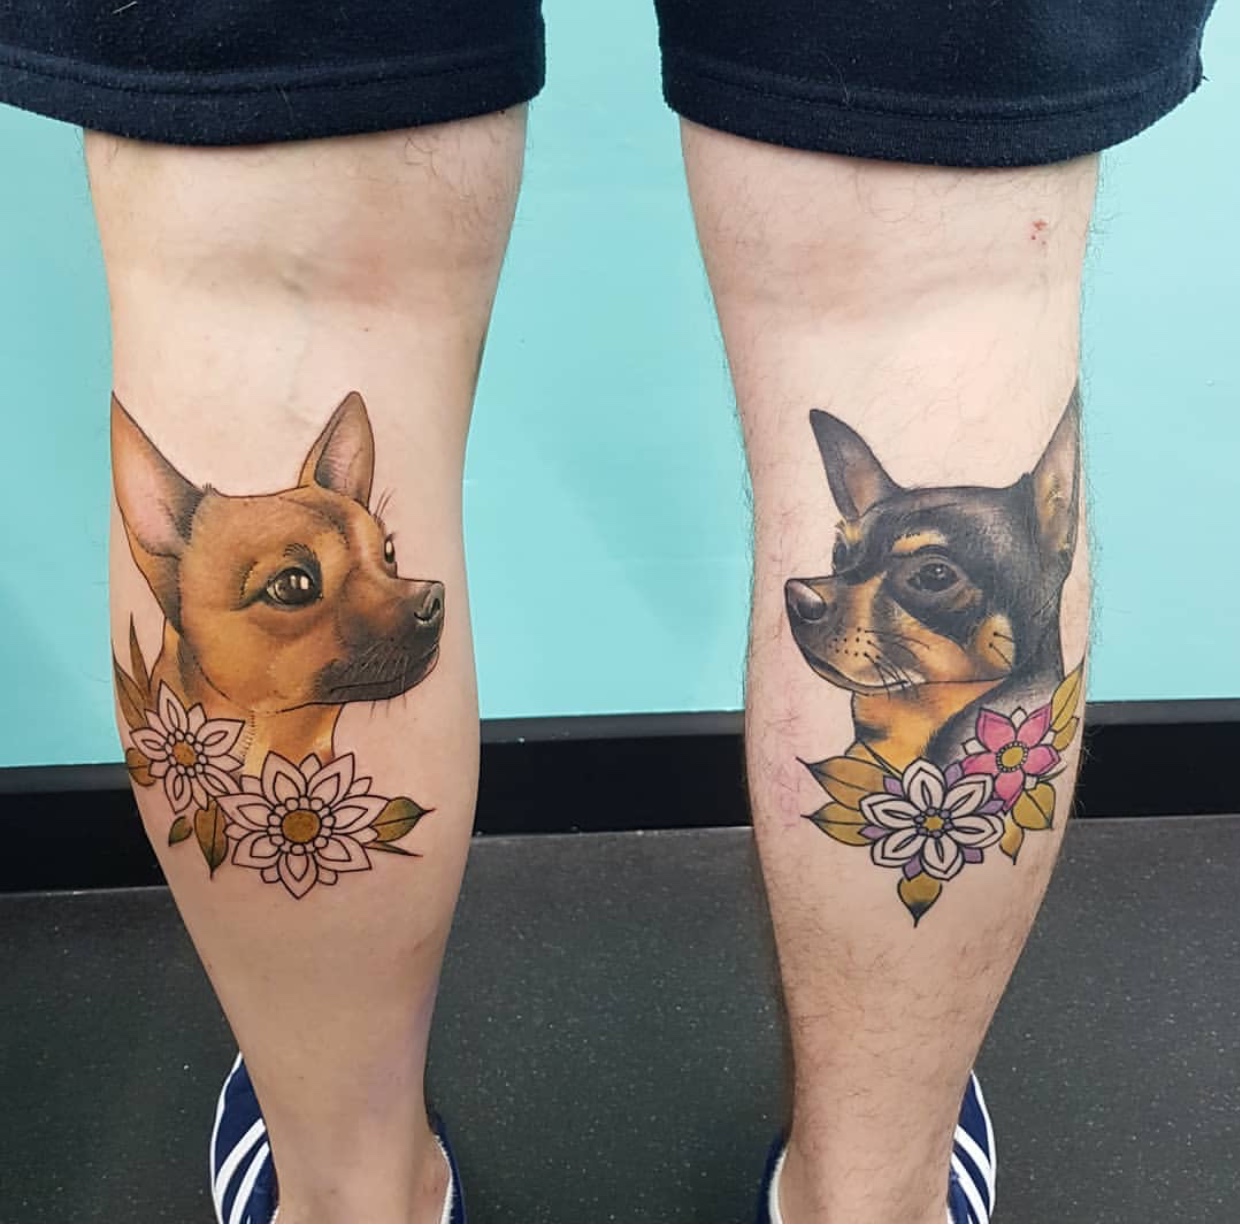 Chihuahua with flowers tattoo on both legs